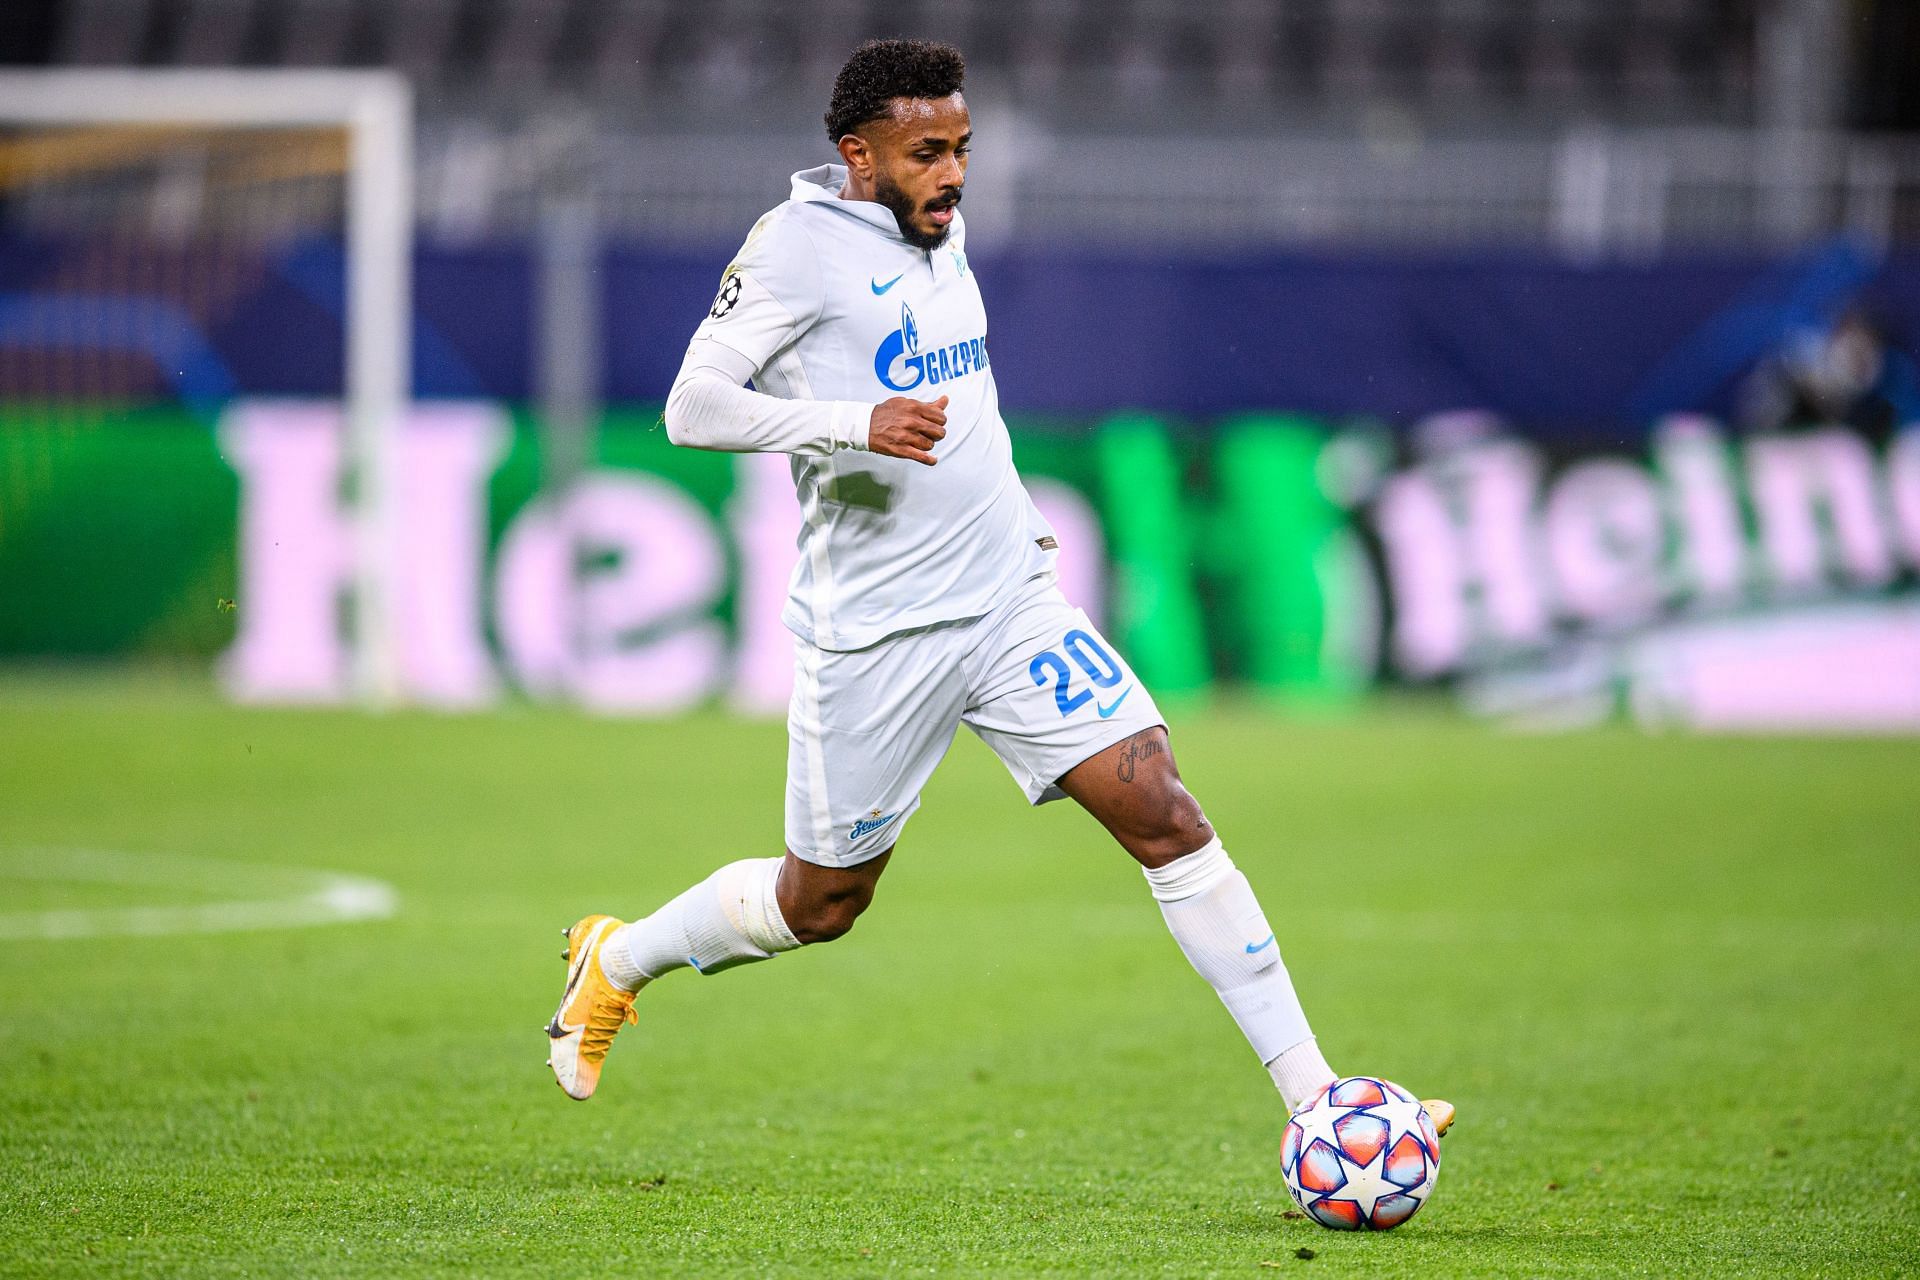 Wendel will be a huge miss for Zenit